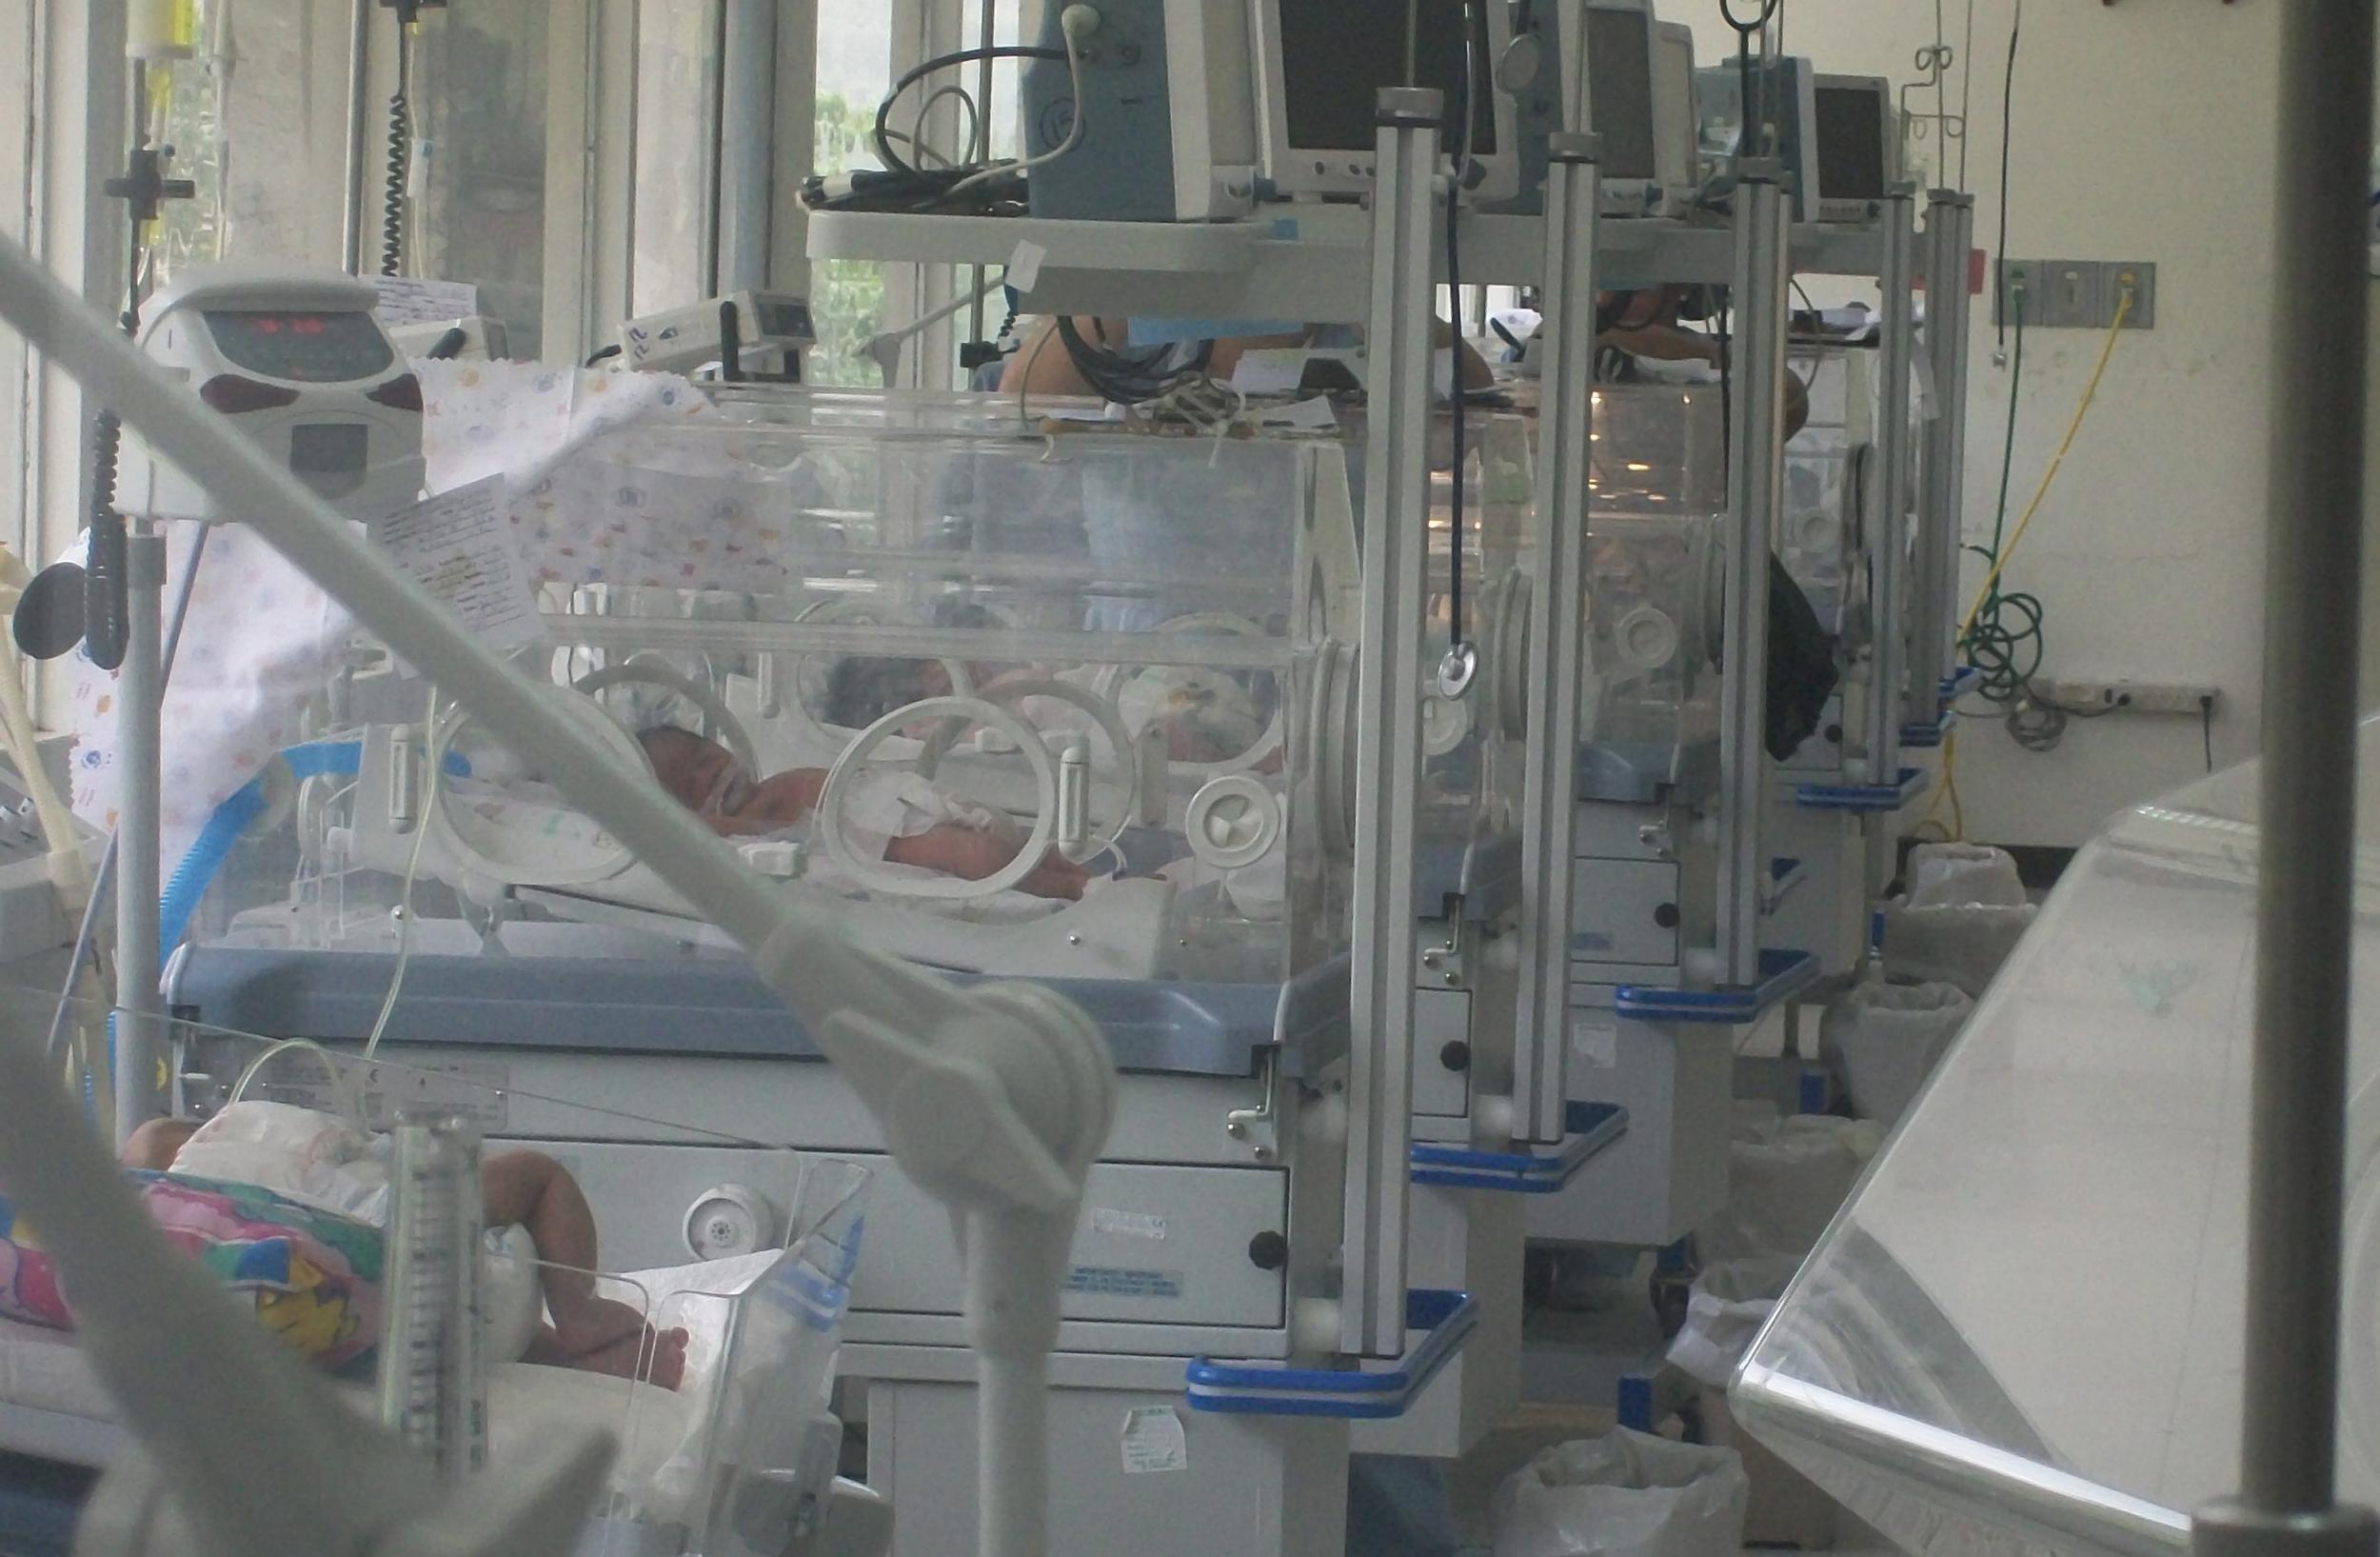 The baby was kept in an incubator for 23 days and removed against medical advice